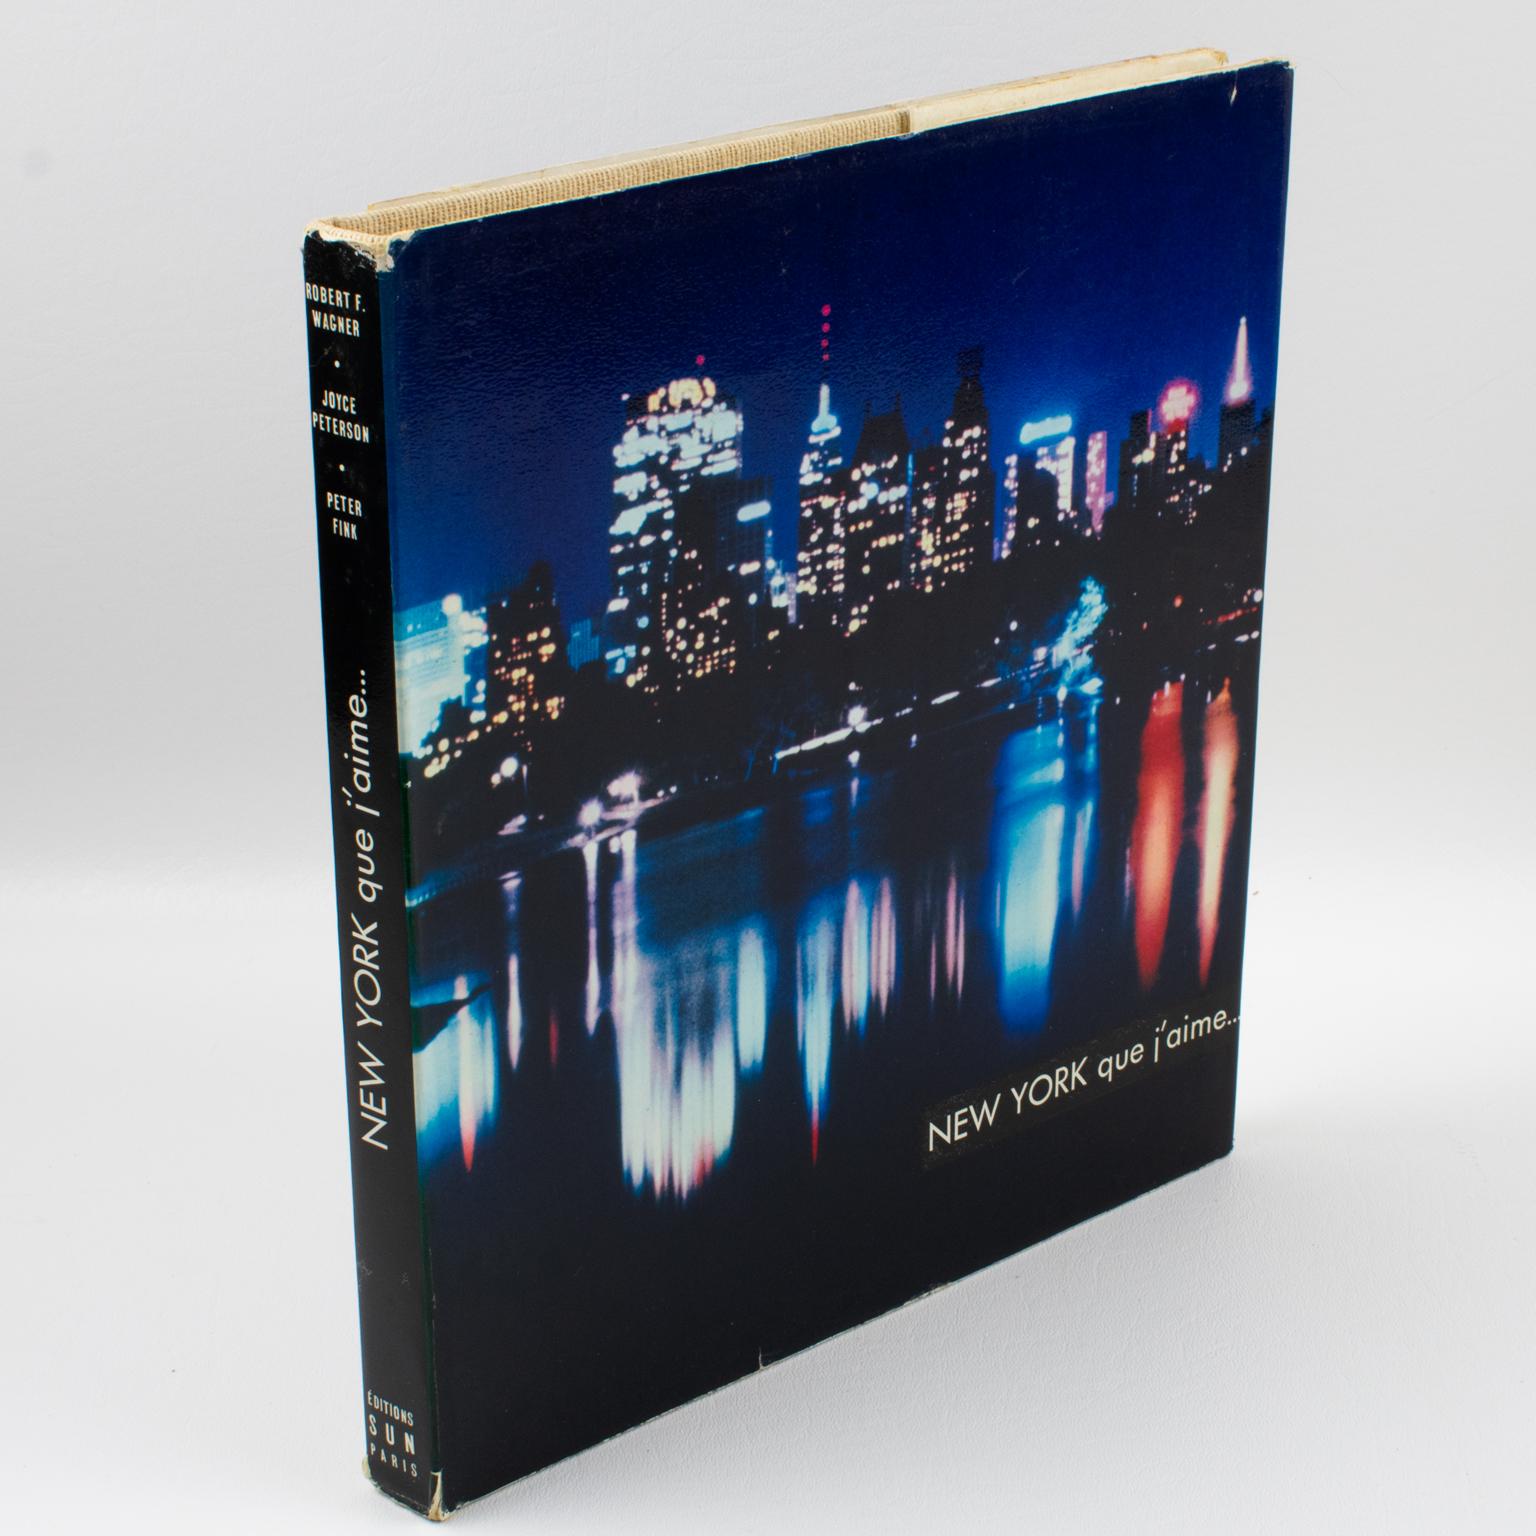 New York Que J'aime Book (New York I love) by Robert F. Wagner (New York Mayor) - Text by Joyce Peterson, Photographs by Peter Fink.
New York is arguably the most dynamic, the most exciting of metropolises, but also certainly the most elusive. It